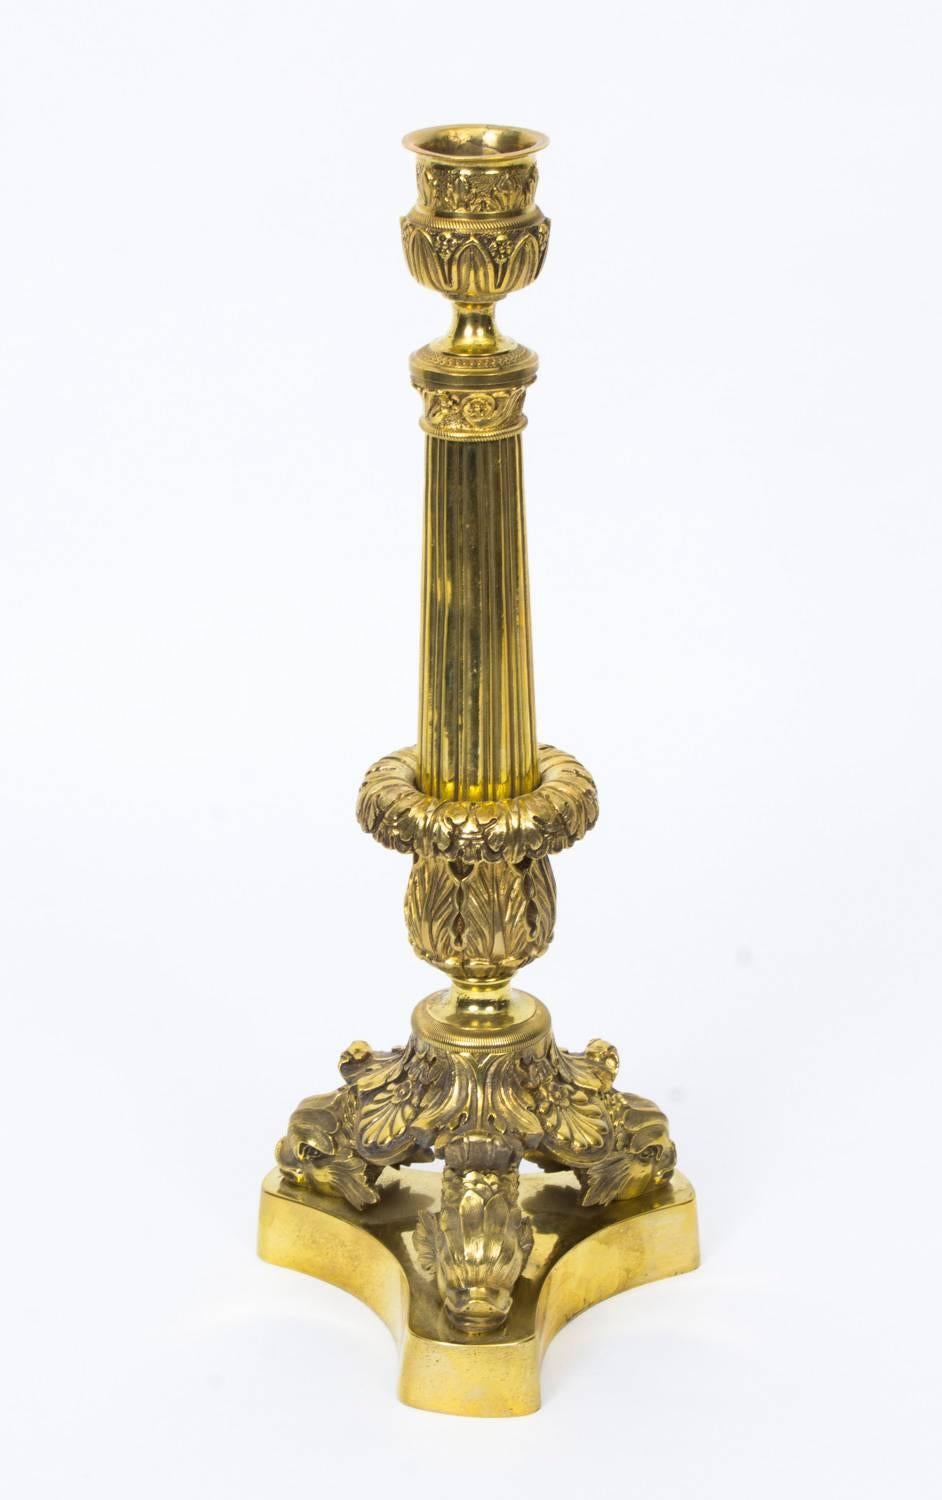 This is a delightful pair of antique Louis XIV style French ormolu candlesticks, circa 1840 in date.

The candlesticks have fluted barrel columns supportin stiff leaf moulded nozzle candle cups, heightened with scalloped beading, resting on